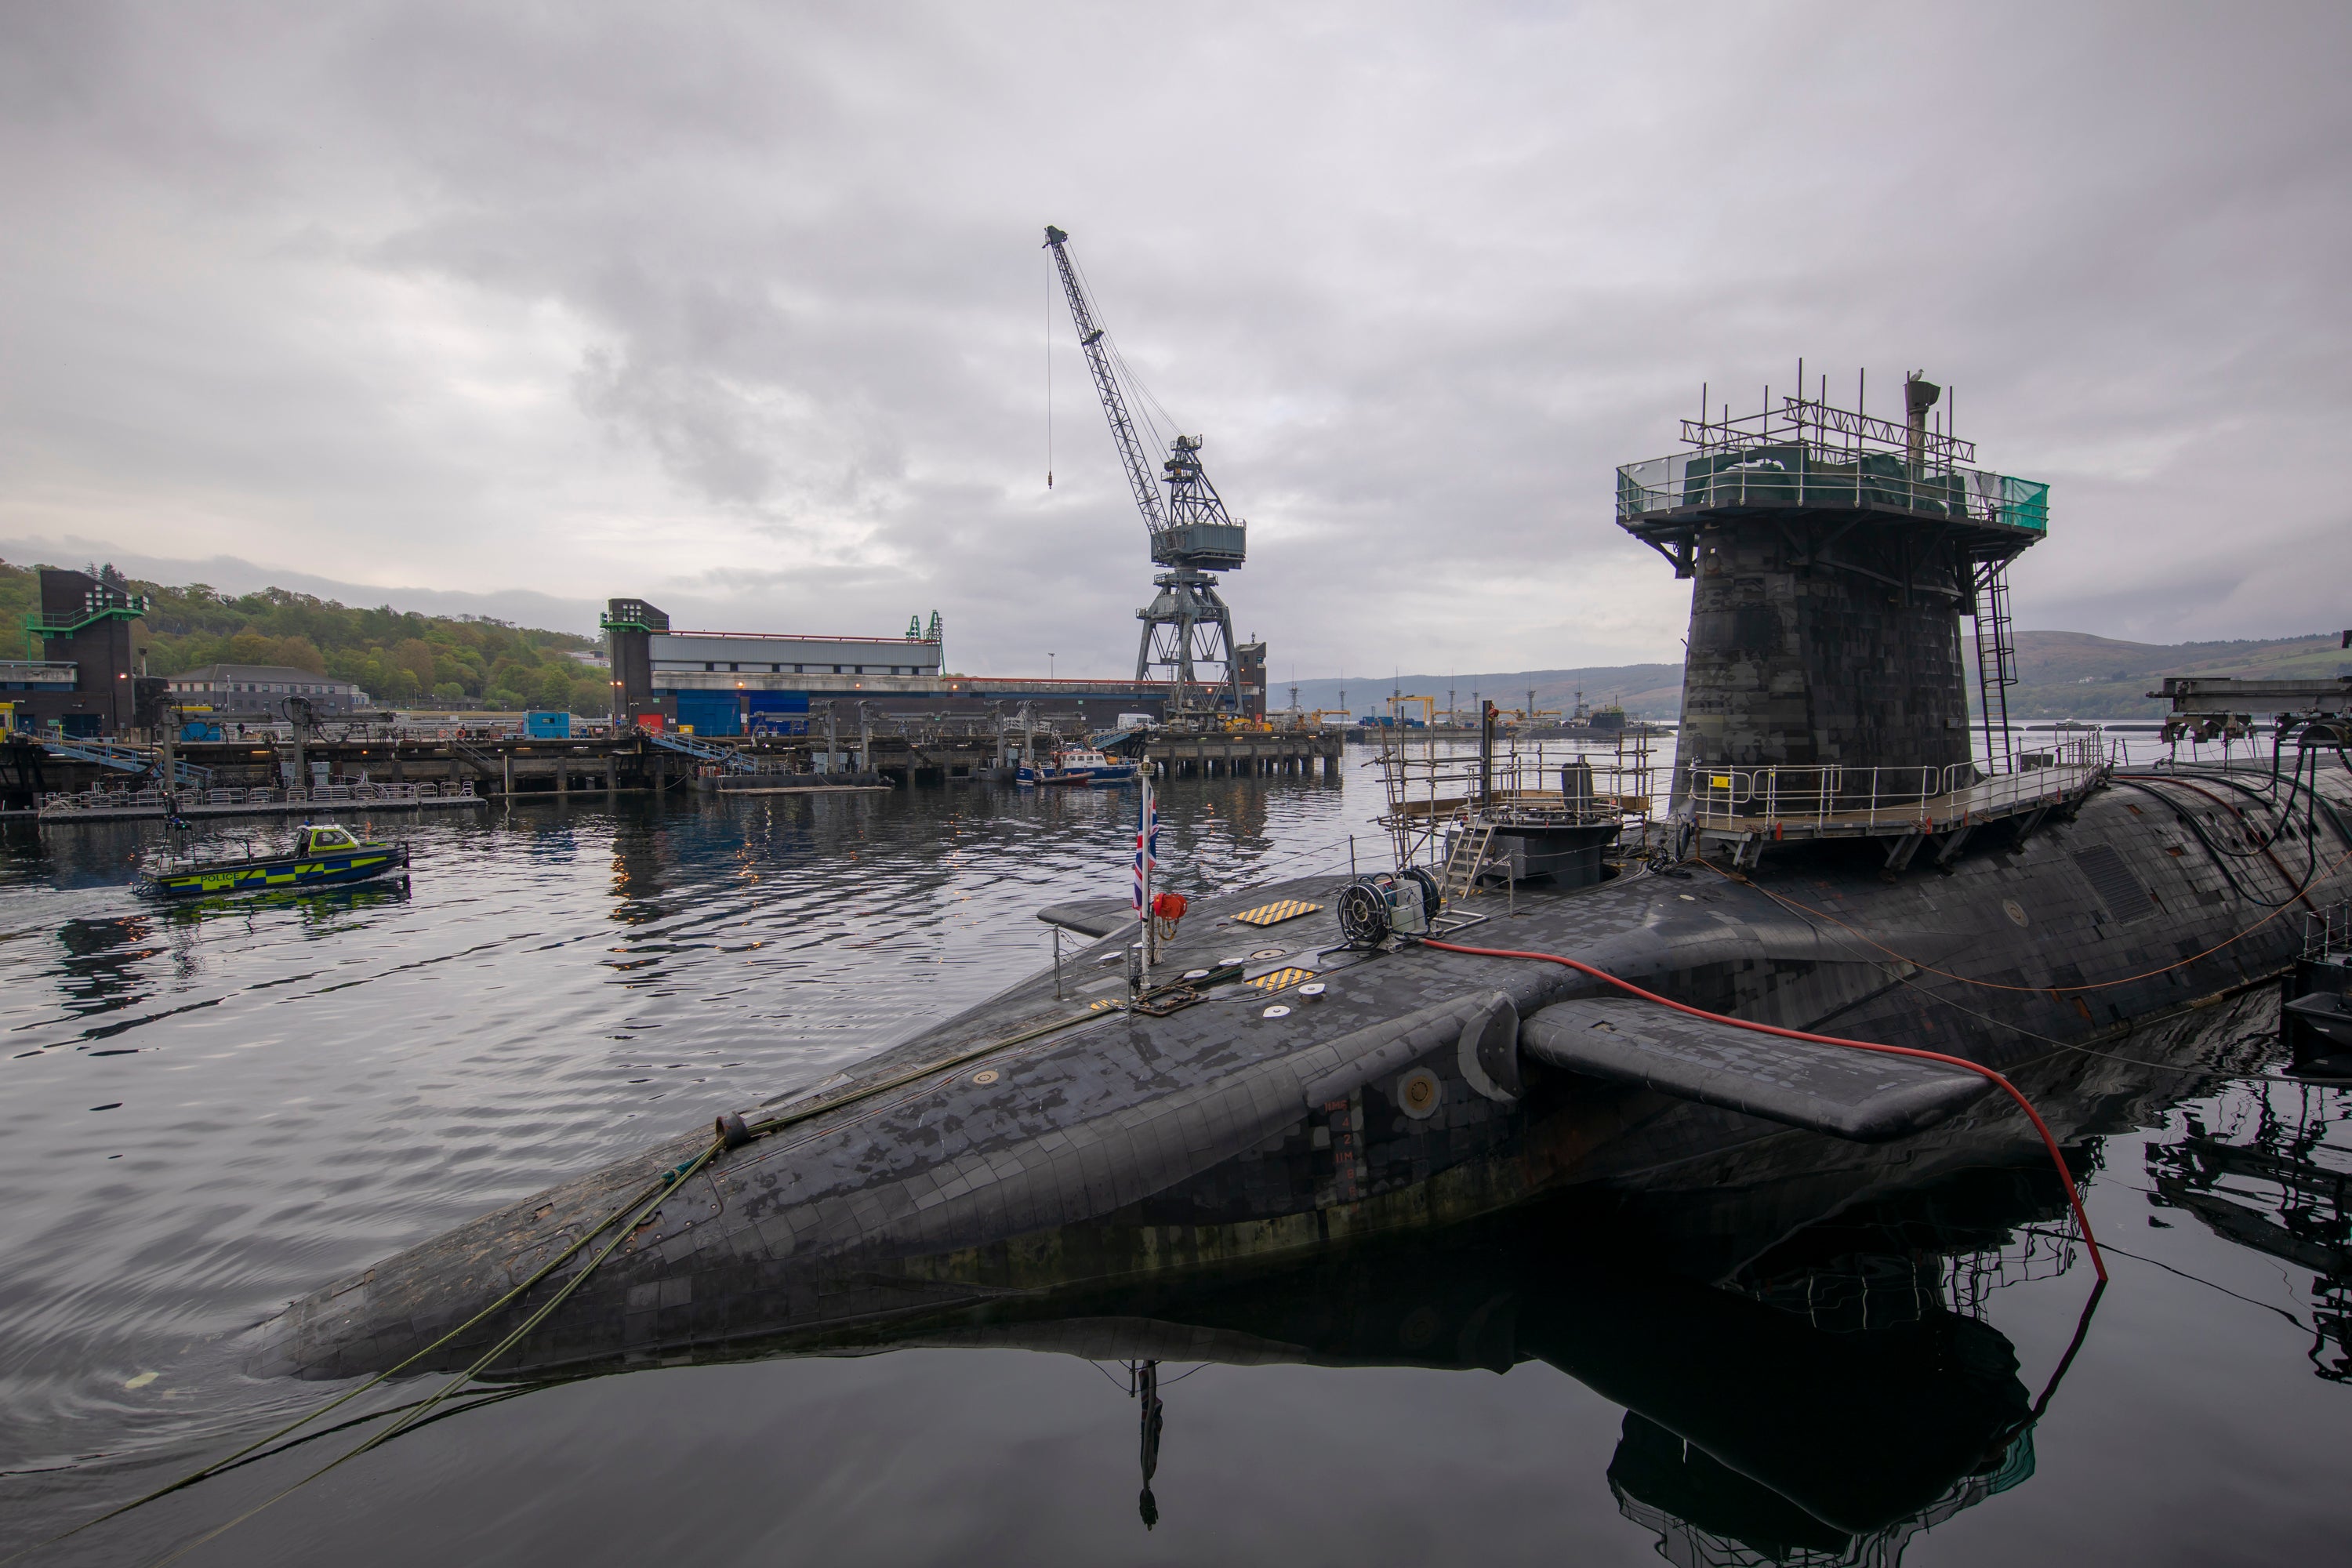 HMS Vigilant, which carries the UK’s Trident nuclear deterrent